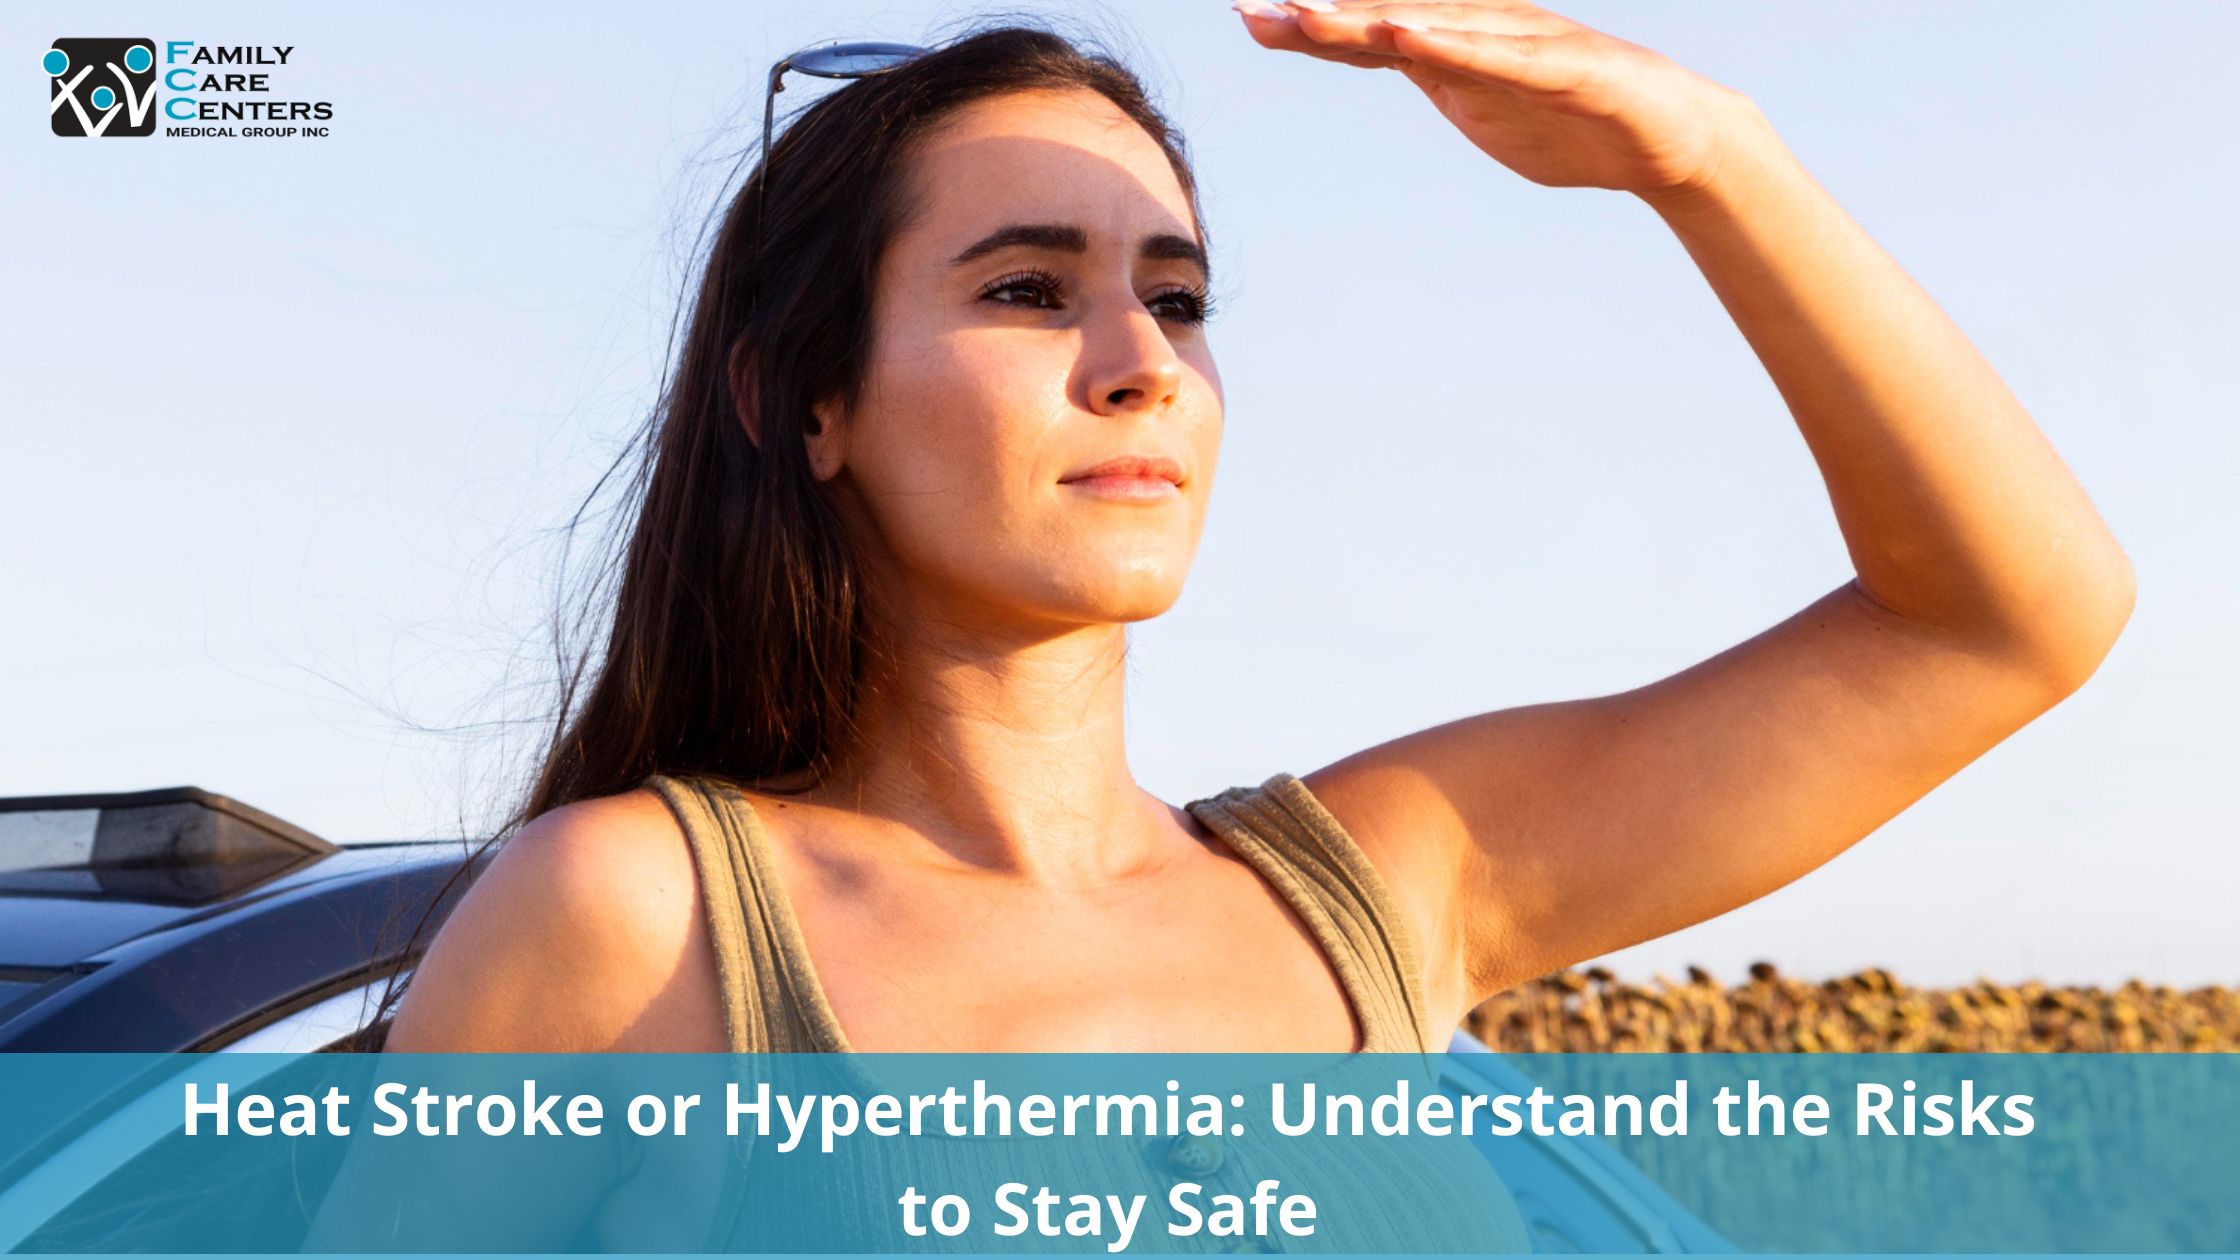 Heat Stroke or Hyperthermia: Understand the Risks to Stay Safe